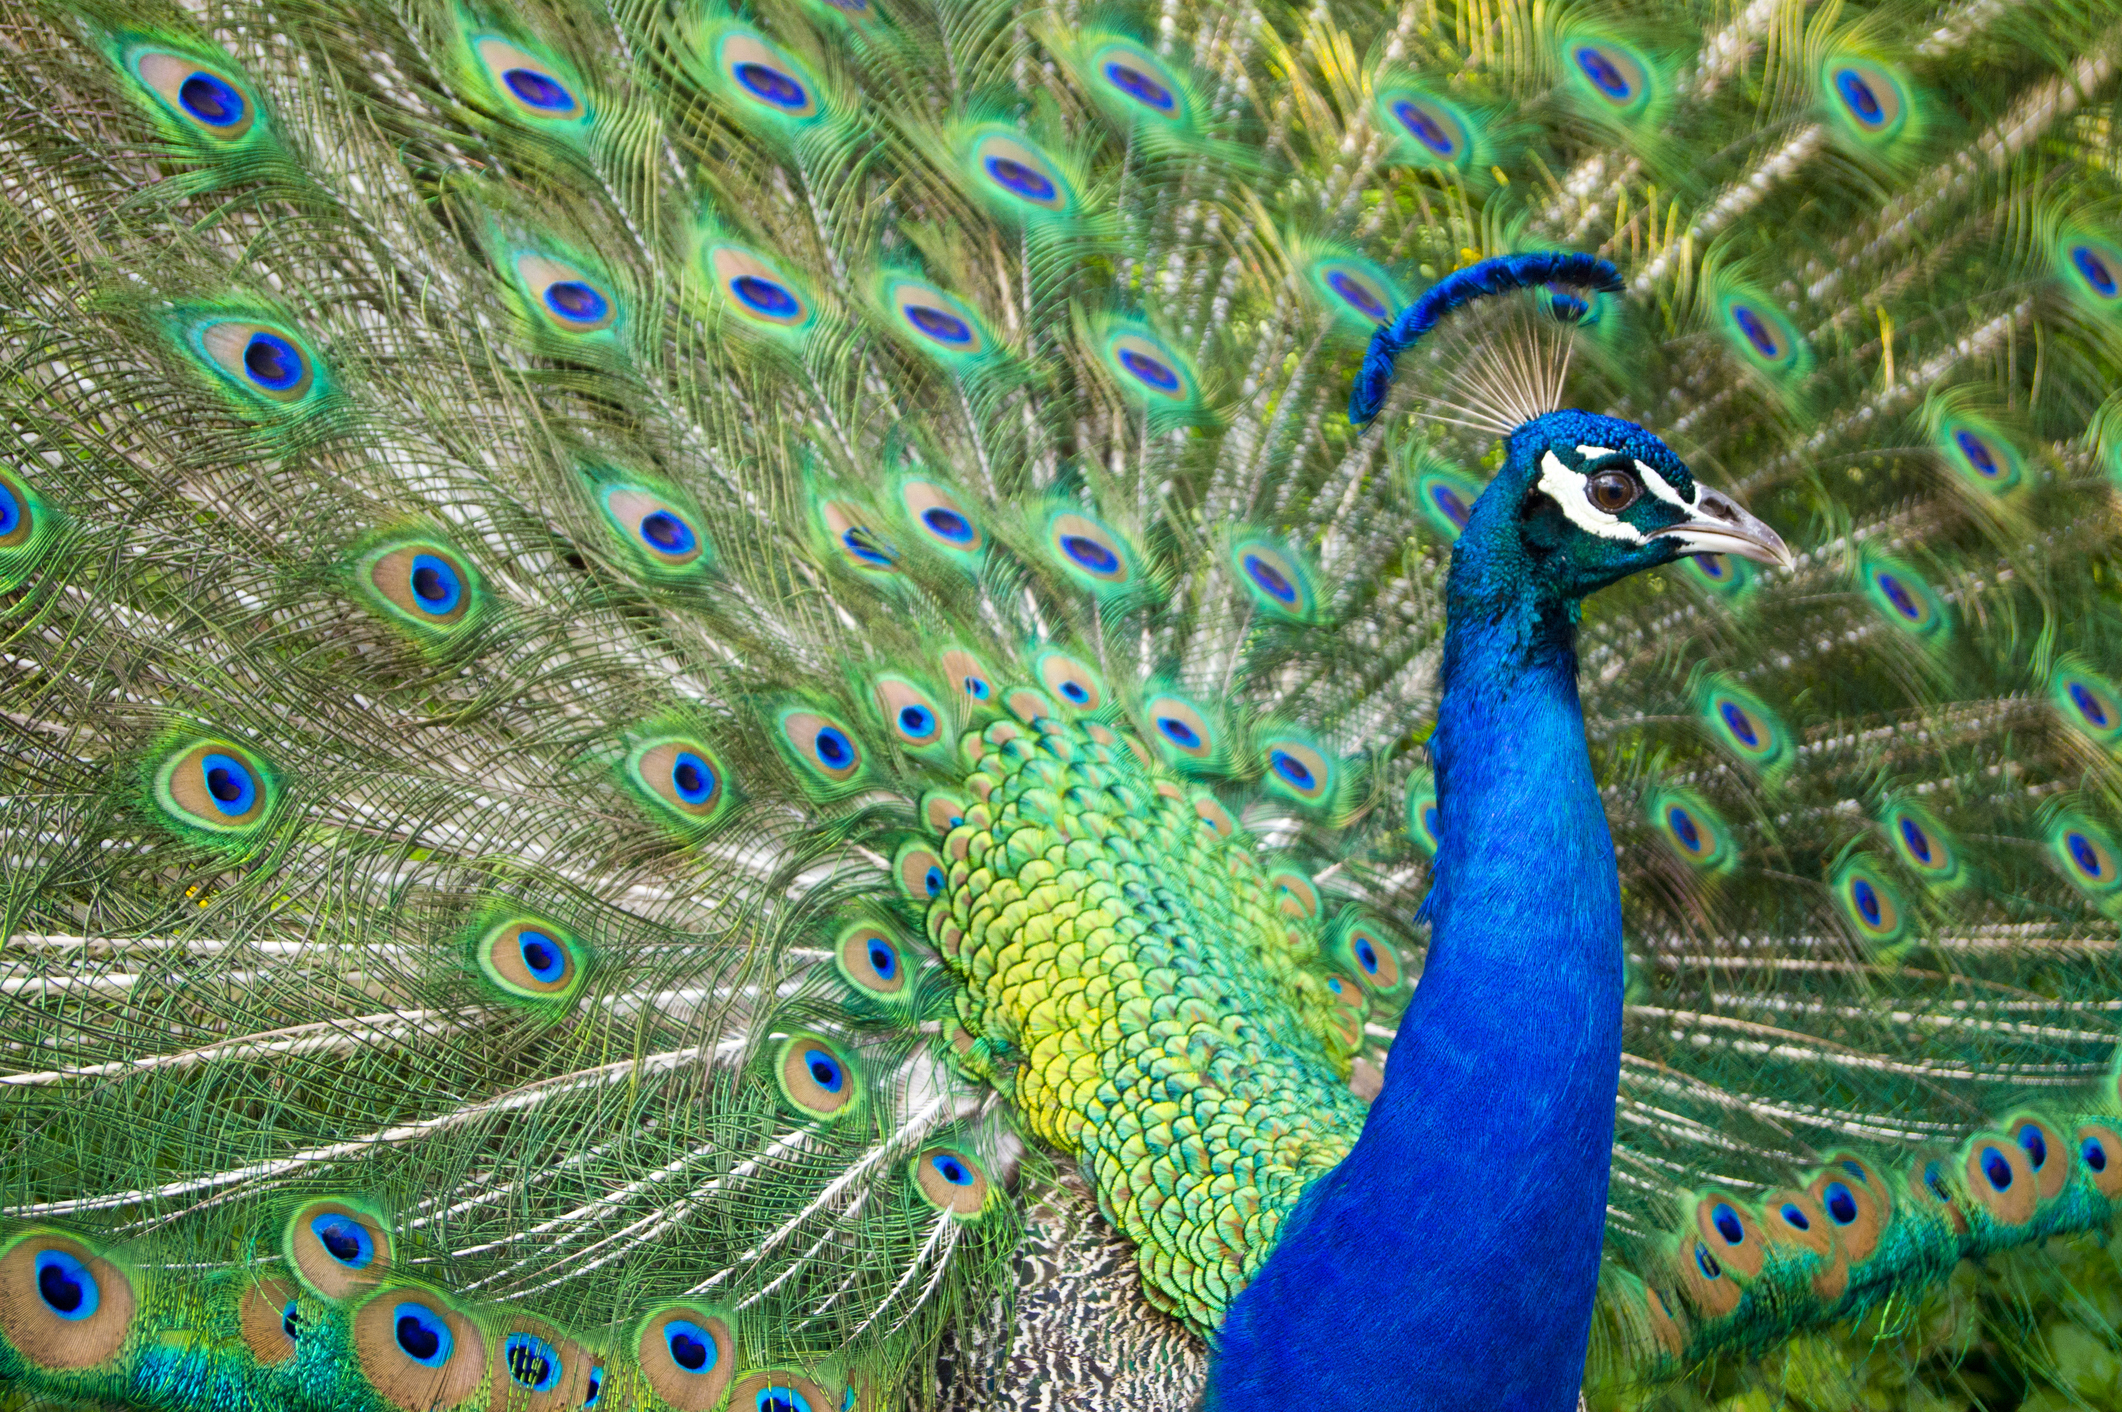 Peacock displaying its vibrant feather plume